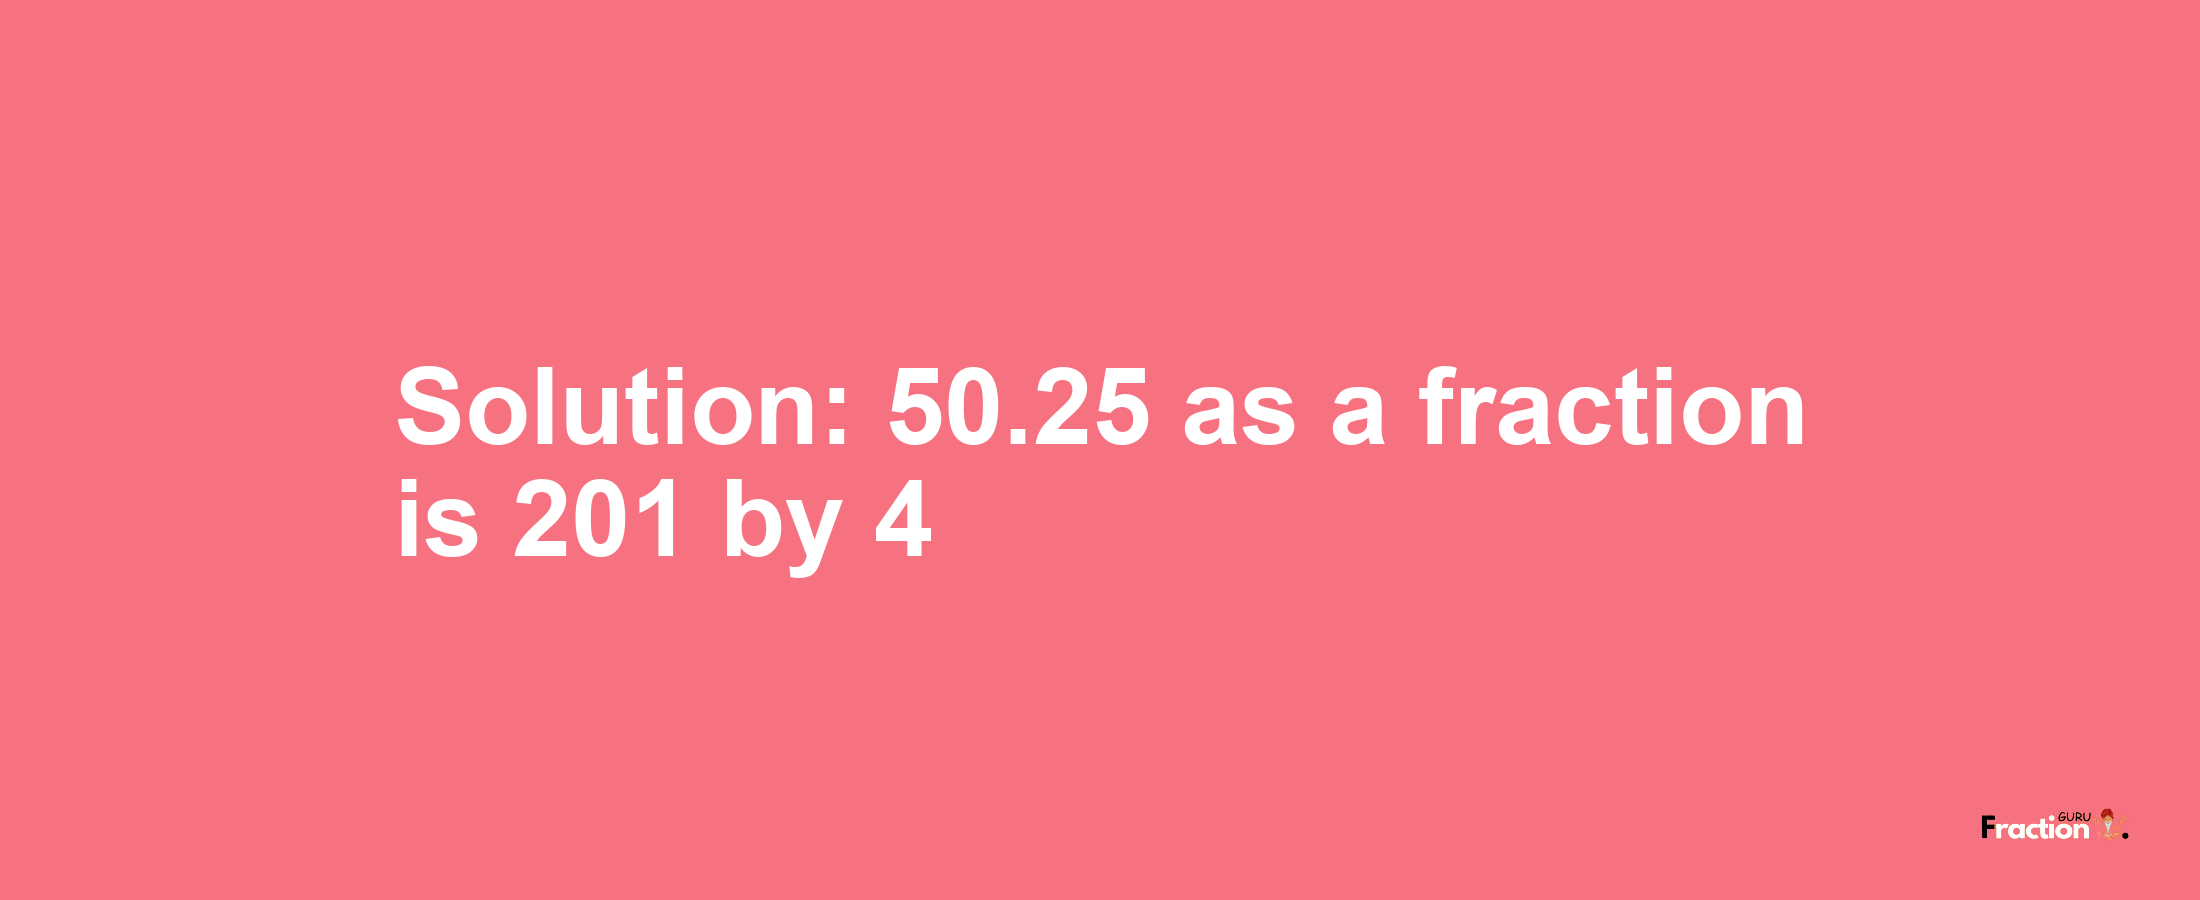 Solution:50.25 as a fraction is 201/4